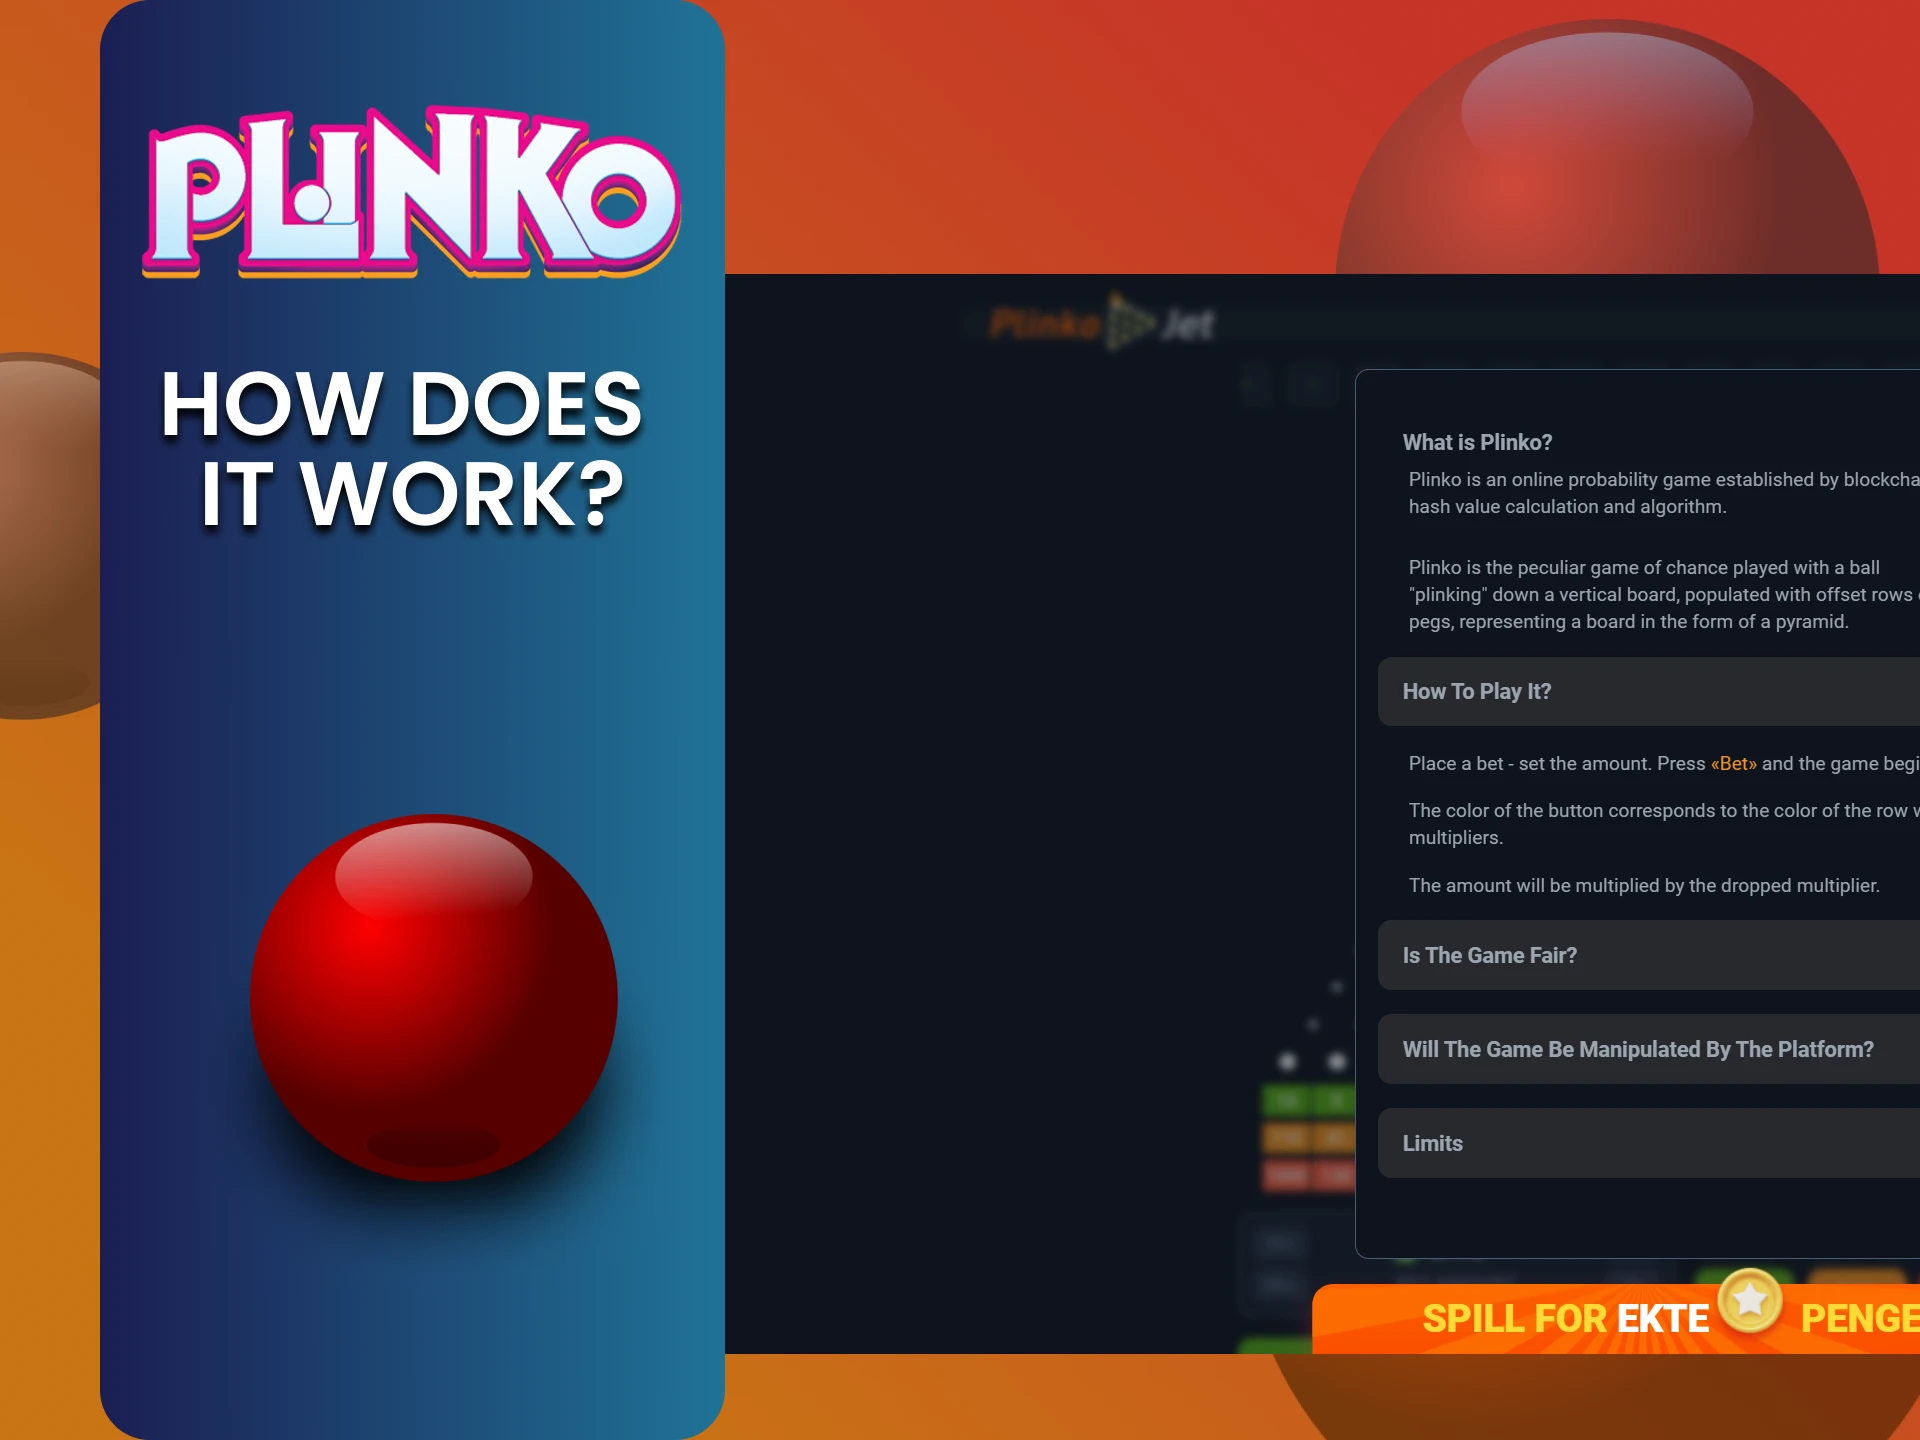 Find out how the Plinko game works.